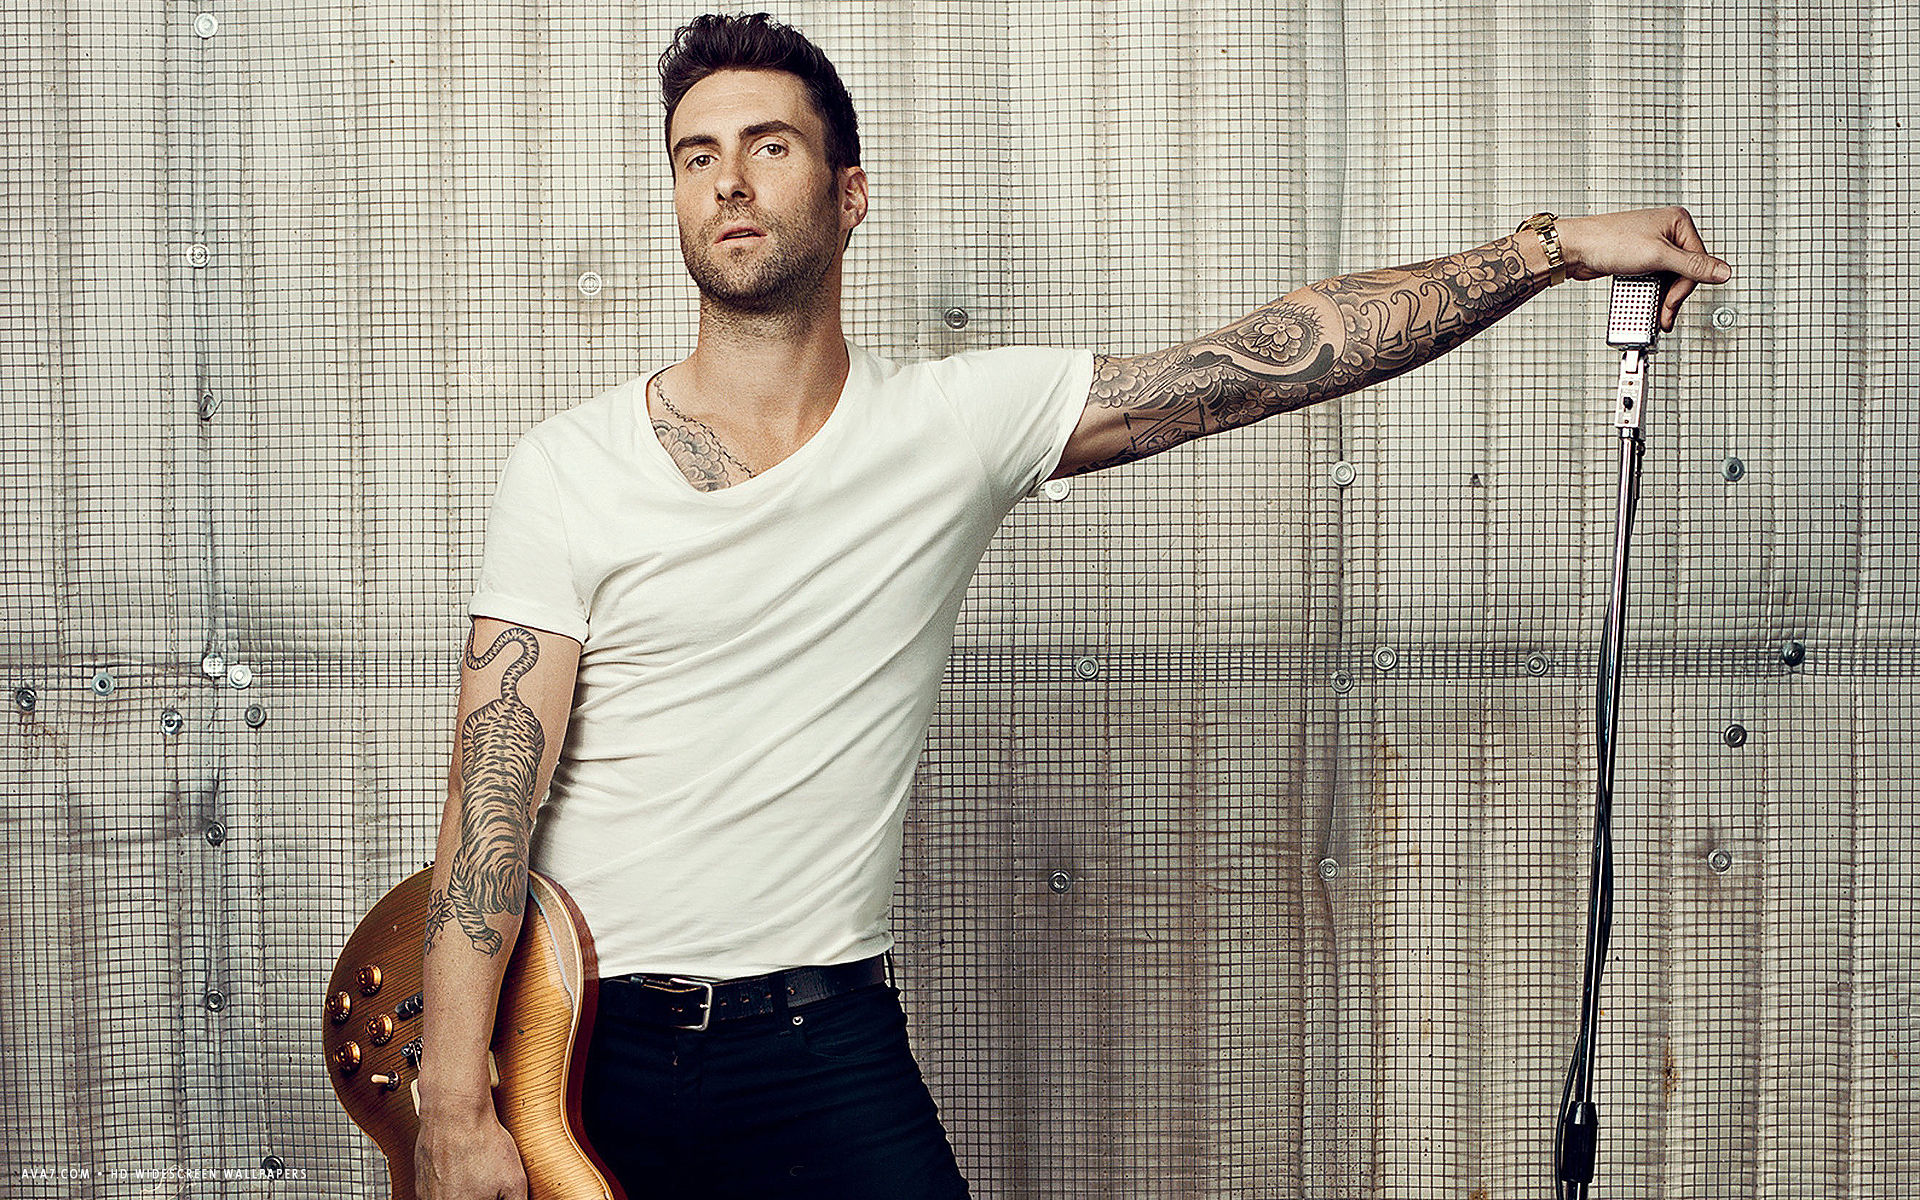 Casting Call for Lead / Supporting Roles in Adam Levine Music Video